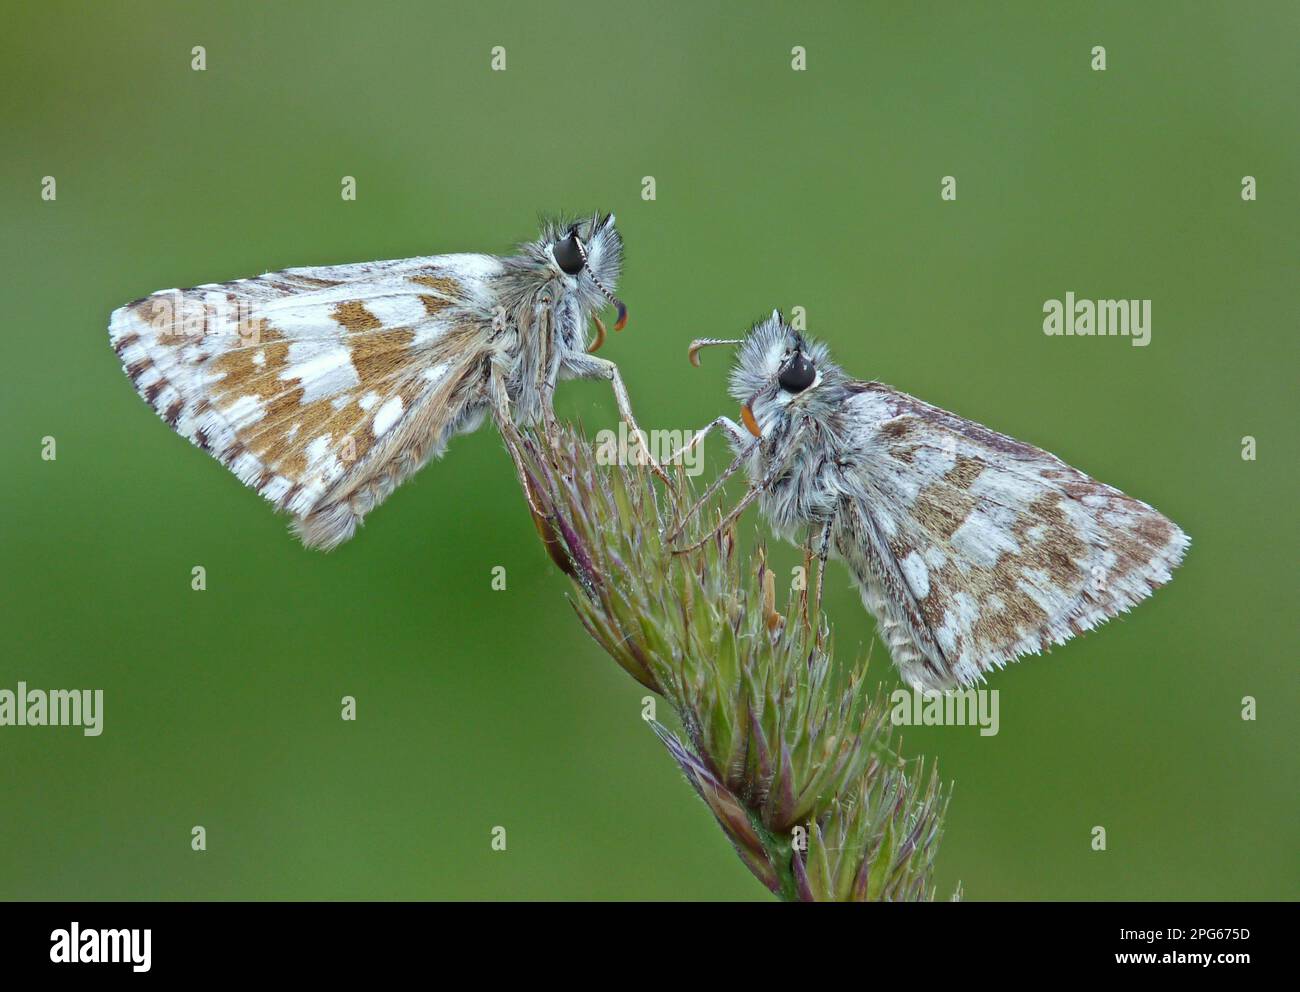 Olive skipper (Pyrgus serratulae), Black Brown Cube Hawk, Other animals, Insects, Butterflies, Animals, Olive Skipper two adults, resti Stock Photo